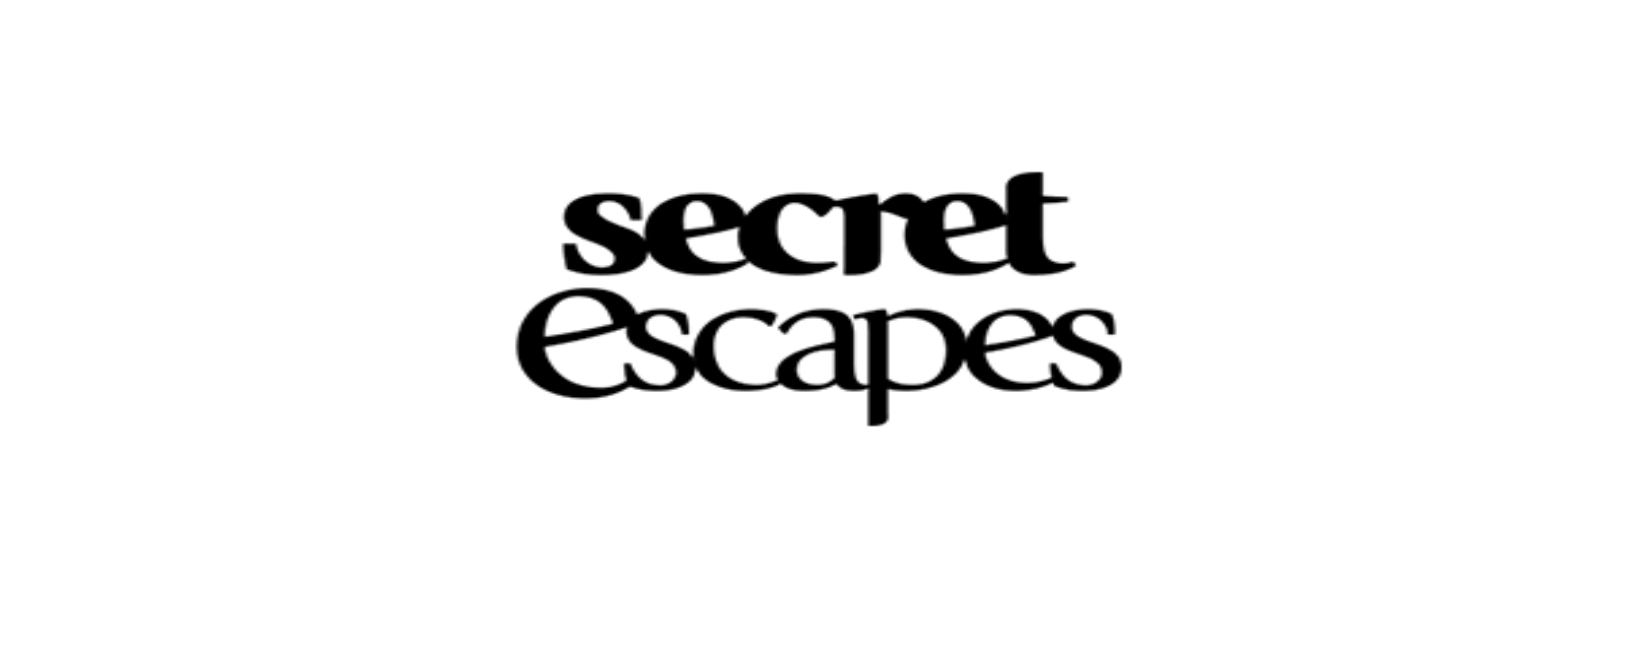 Secret Escapes 2022 Review: Are they too good to be true?